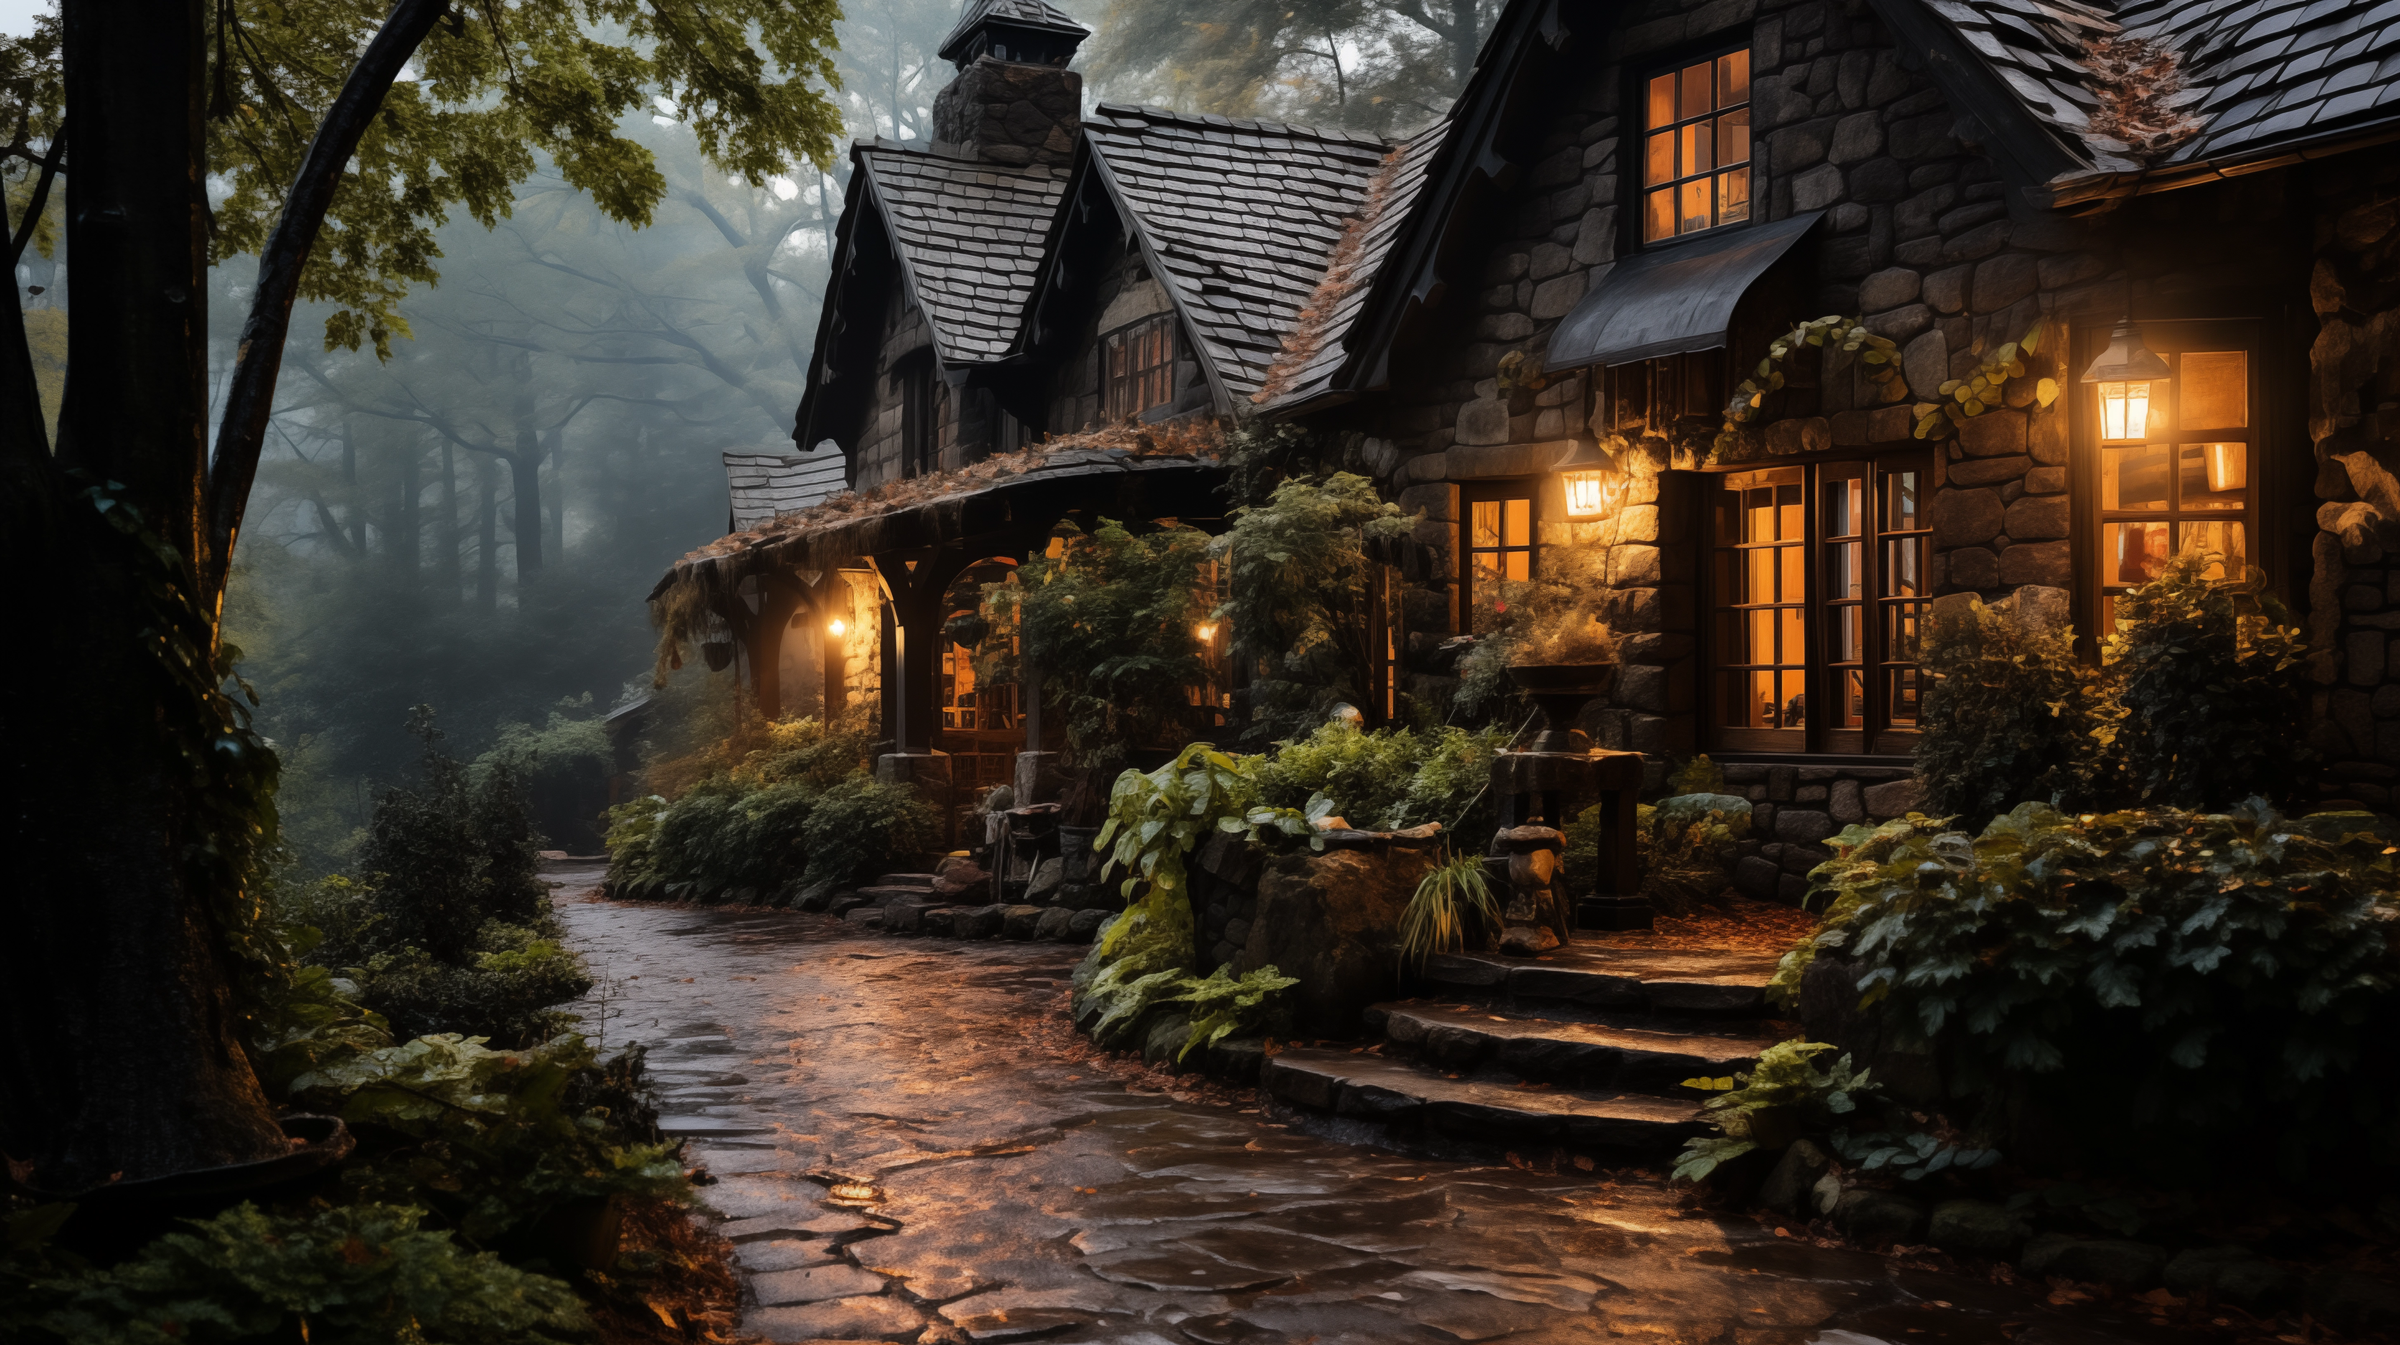 Rustic stone cottage with overly textured stone walls in a lush, wooded setting. The cottage features large, uneven stones, traditional architecture, and warm lighting, highlighting a heavy rustic style.